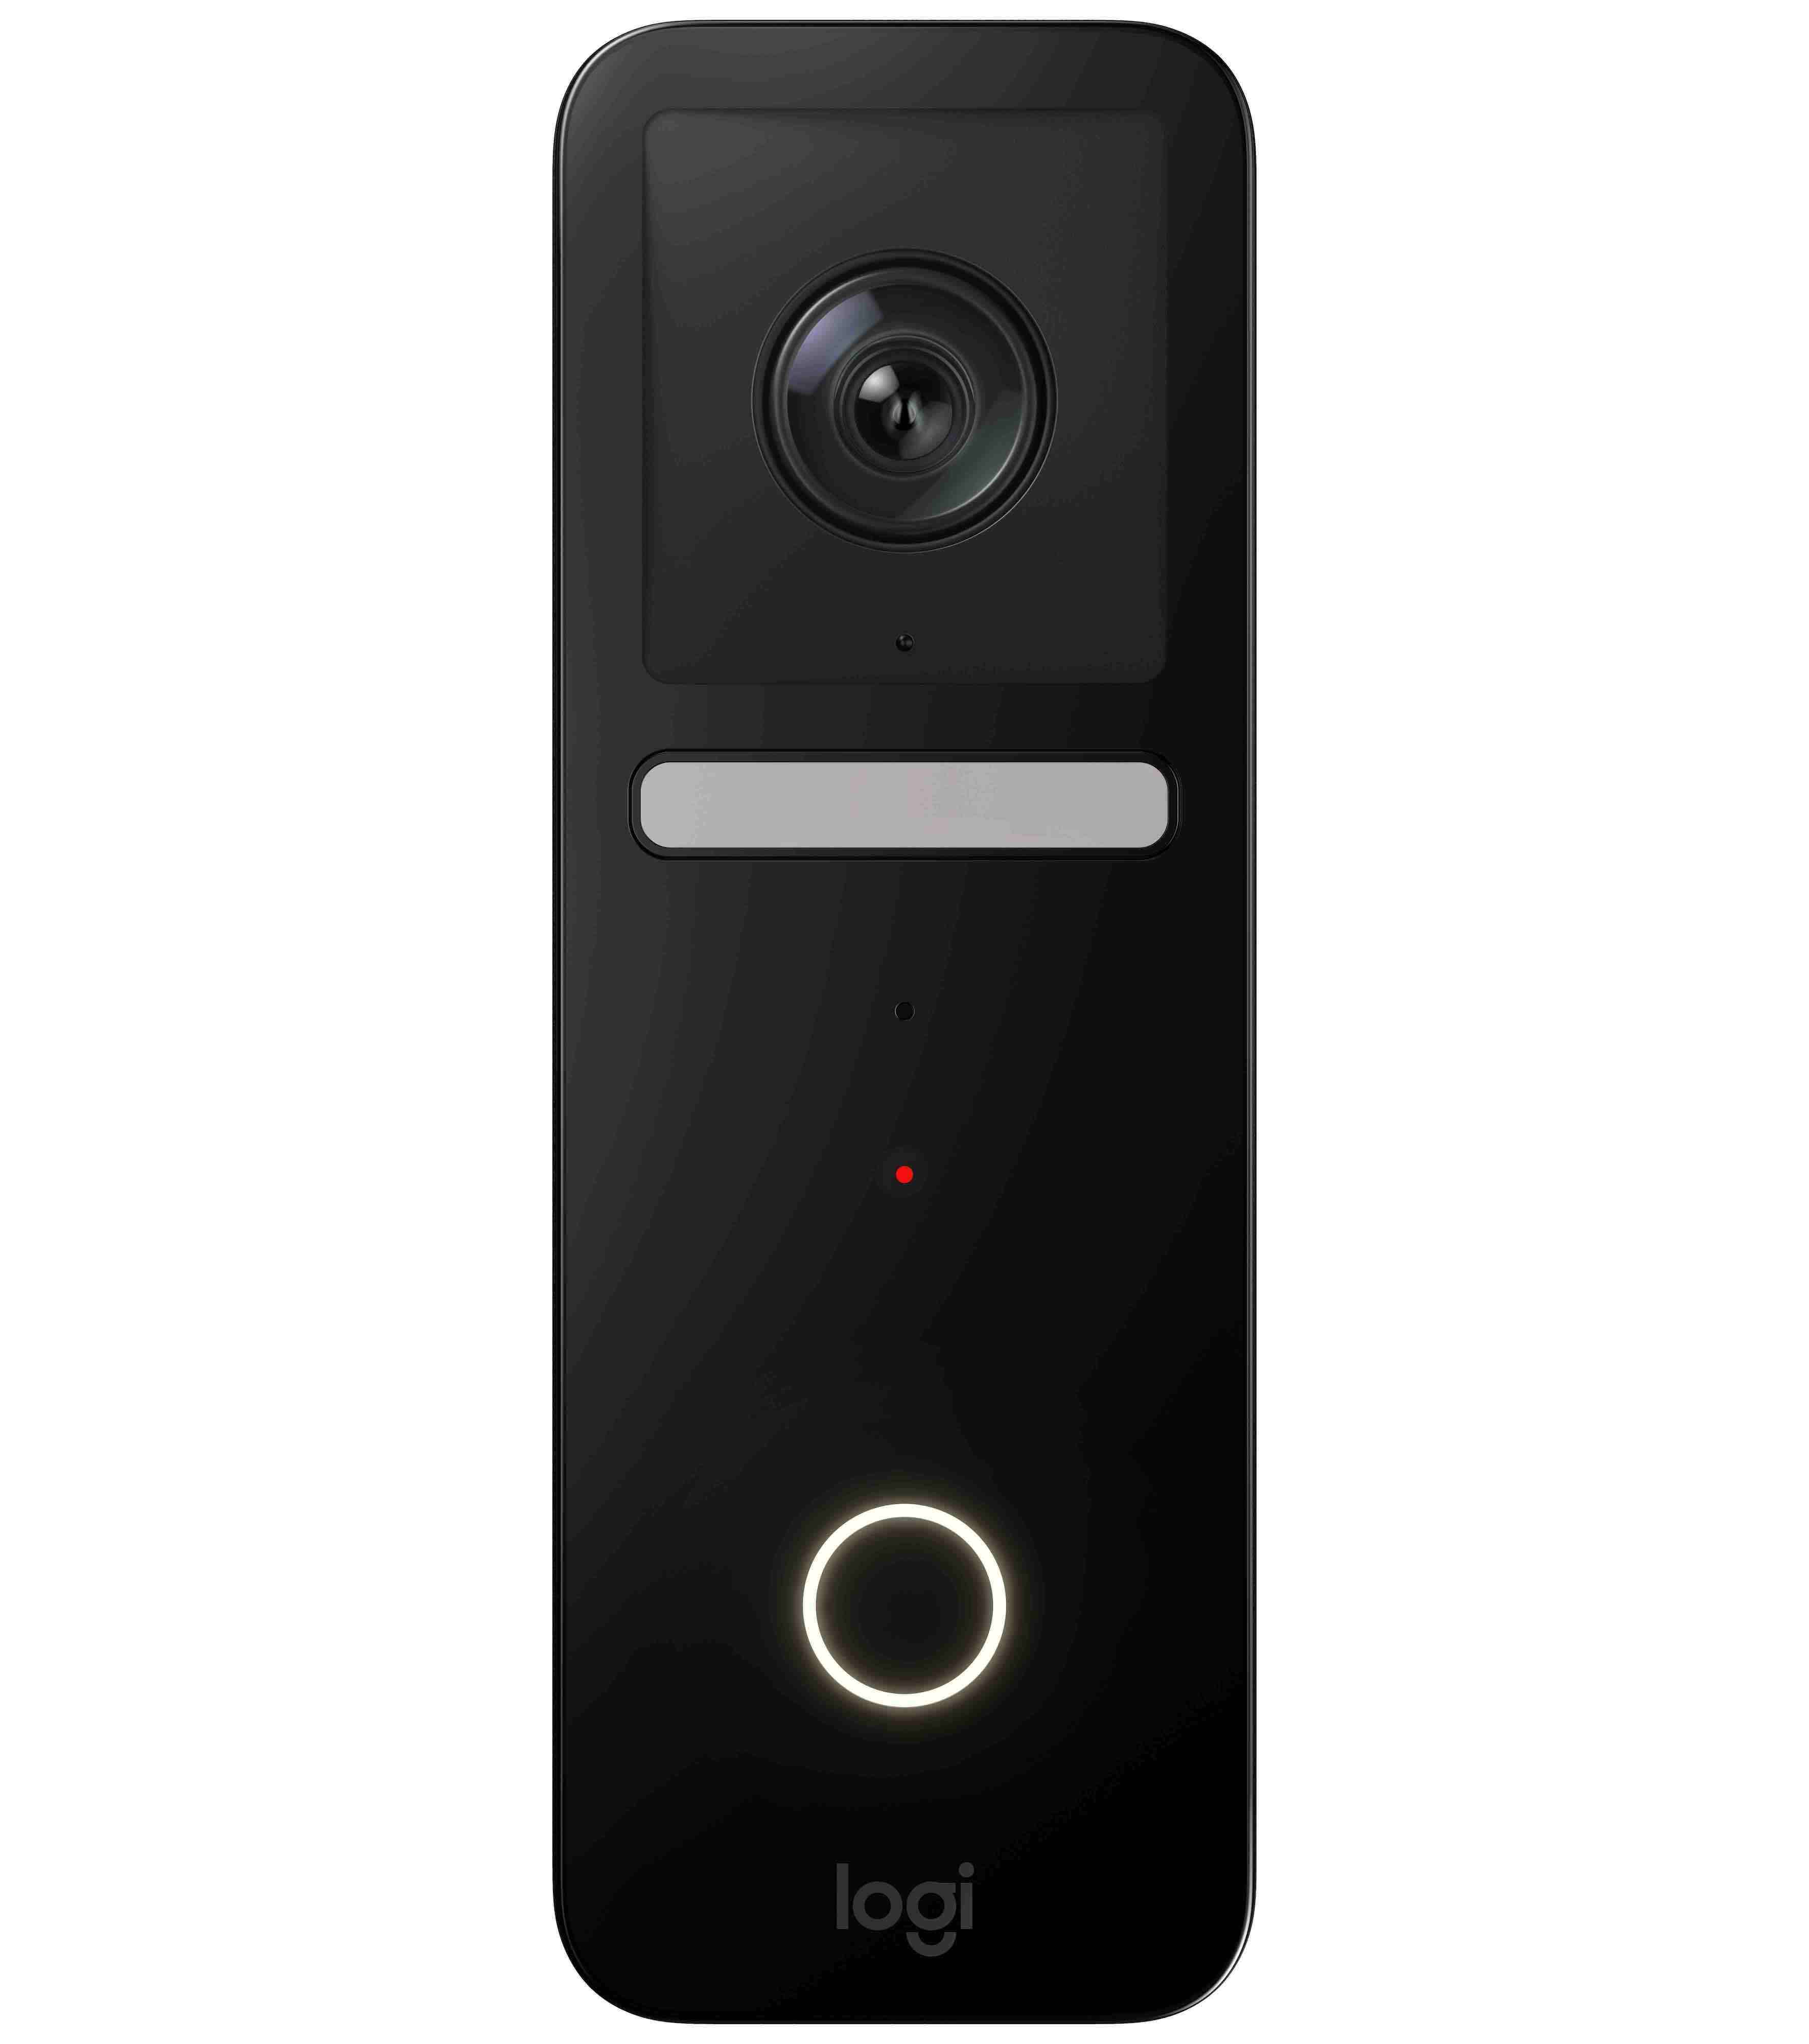 Unveils Circle View Doorbell, Designed Exclusively for Apple Business Wire